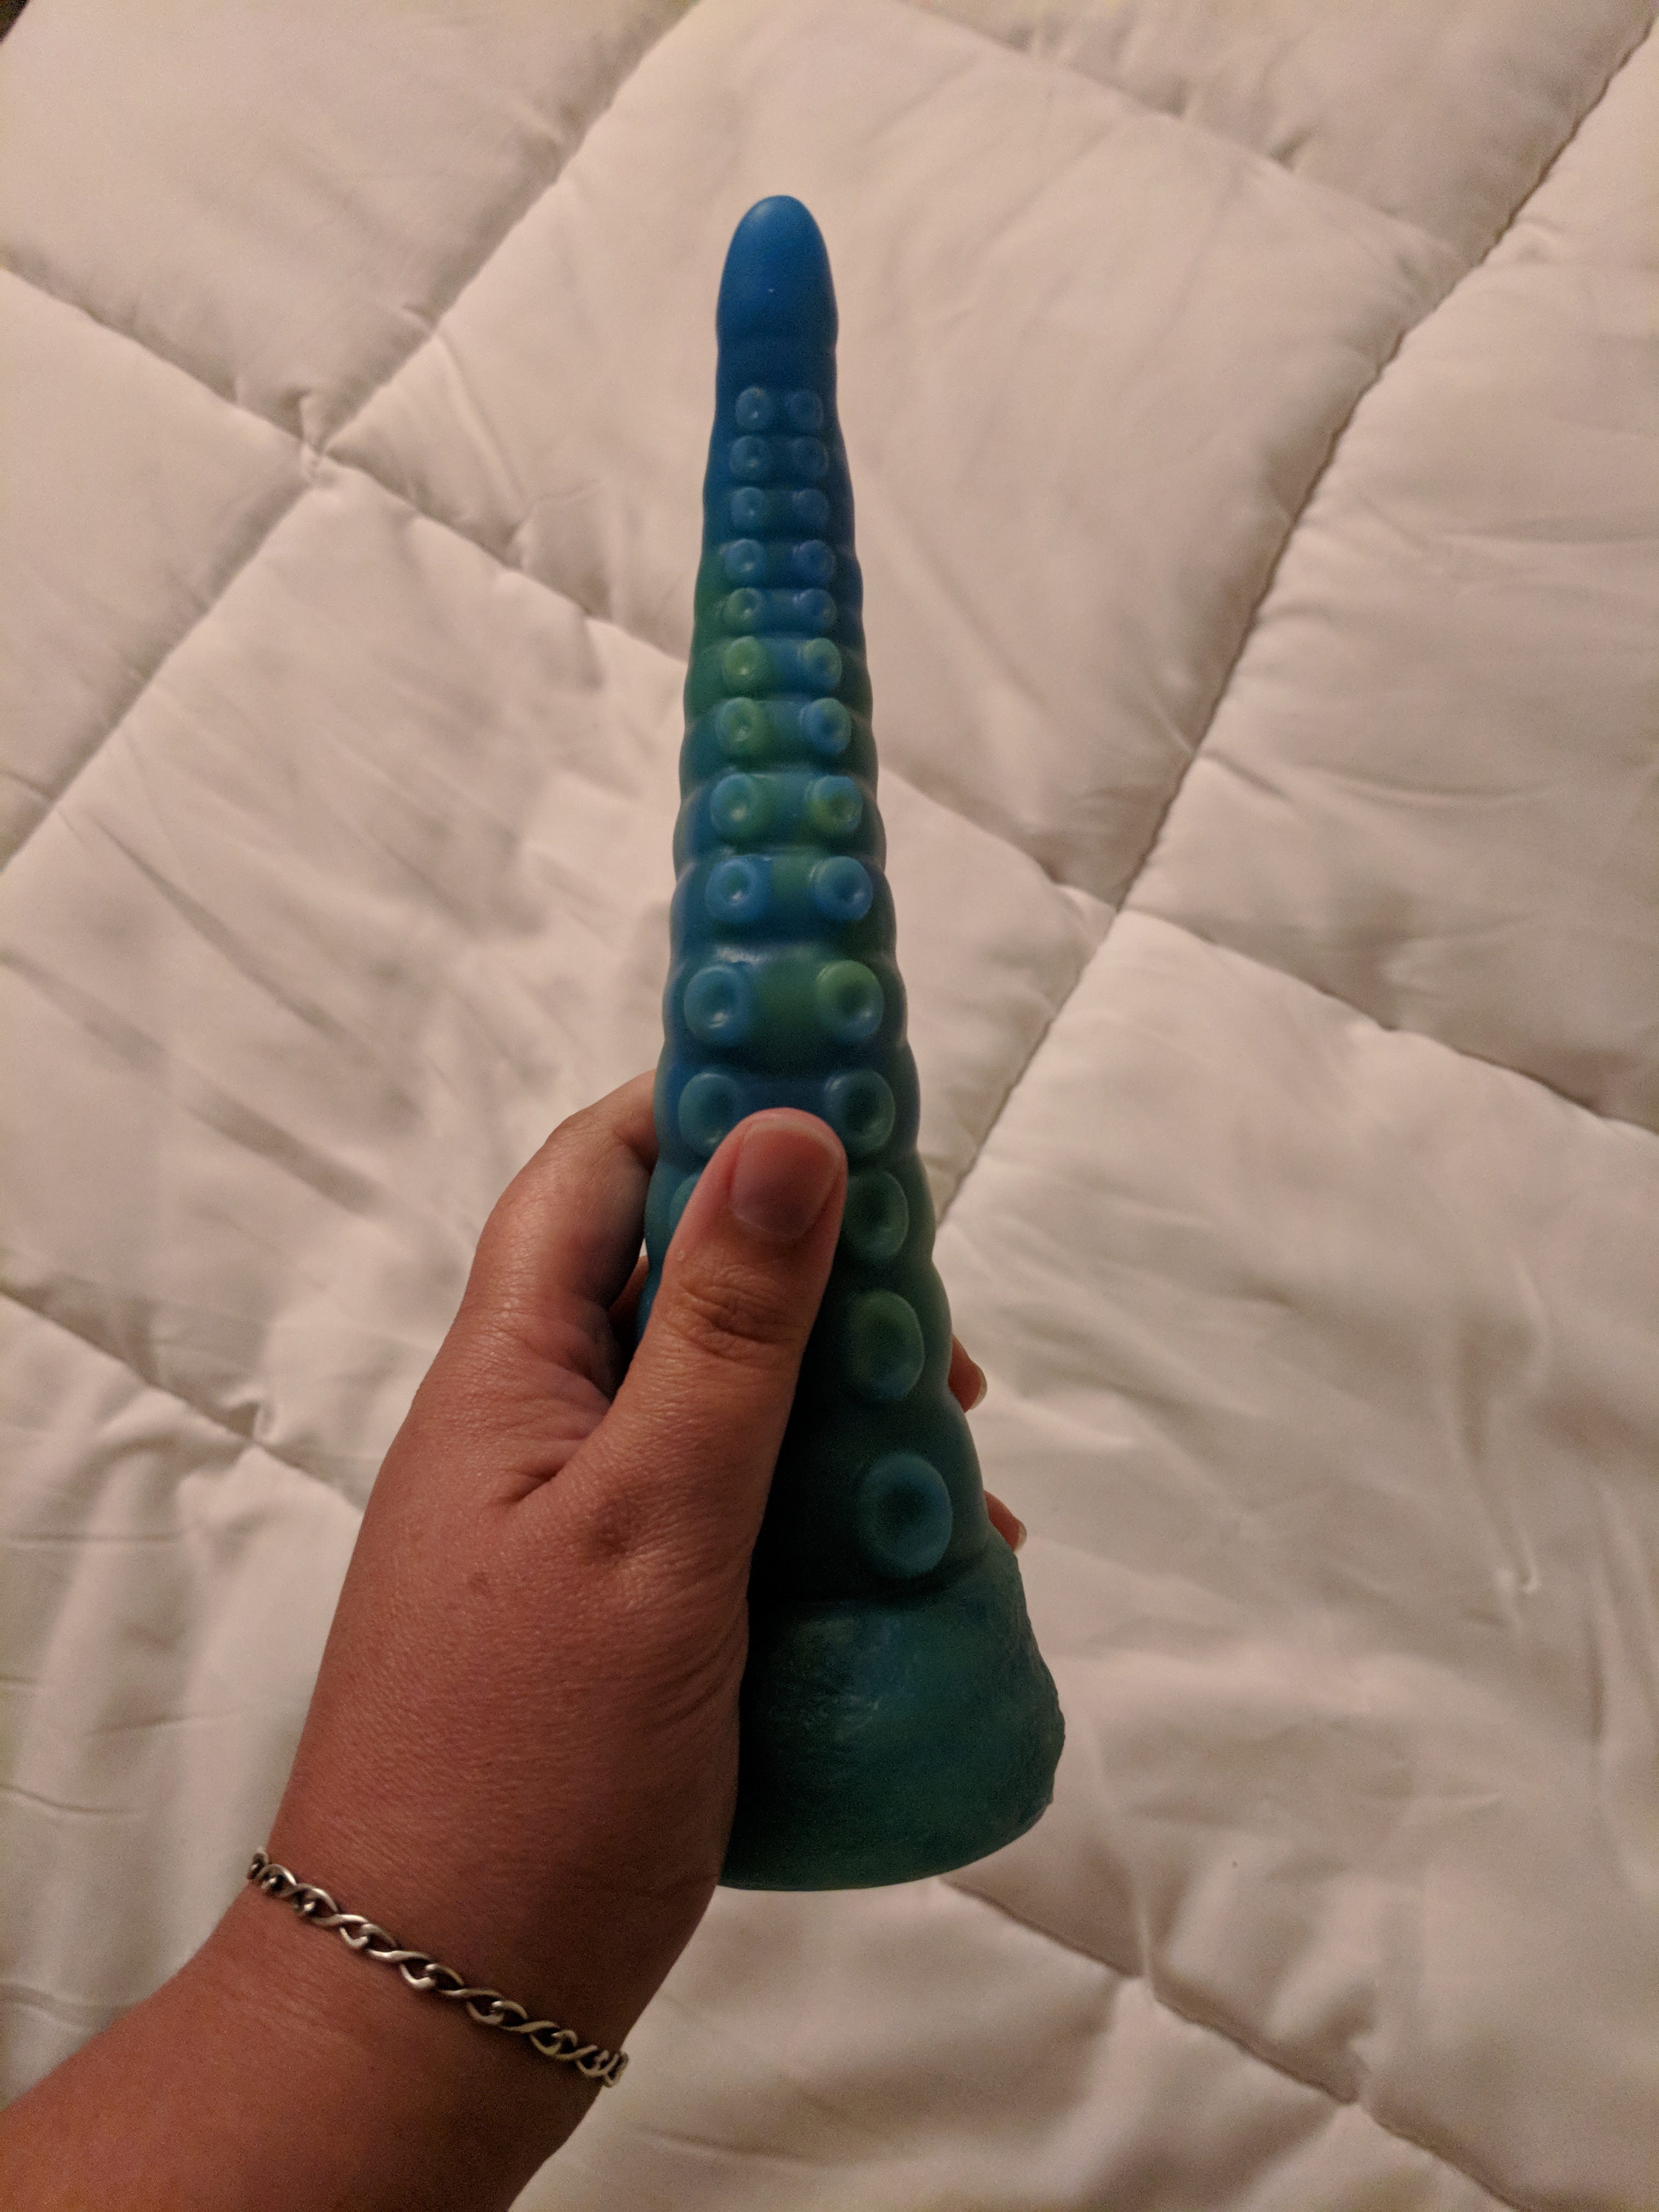 Tentacle dildo in hand, pictured suction cups up